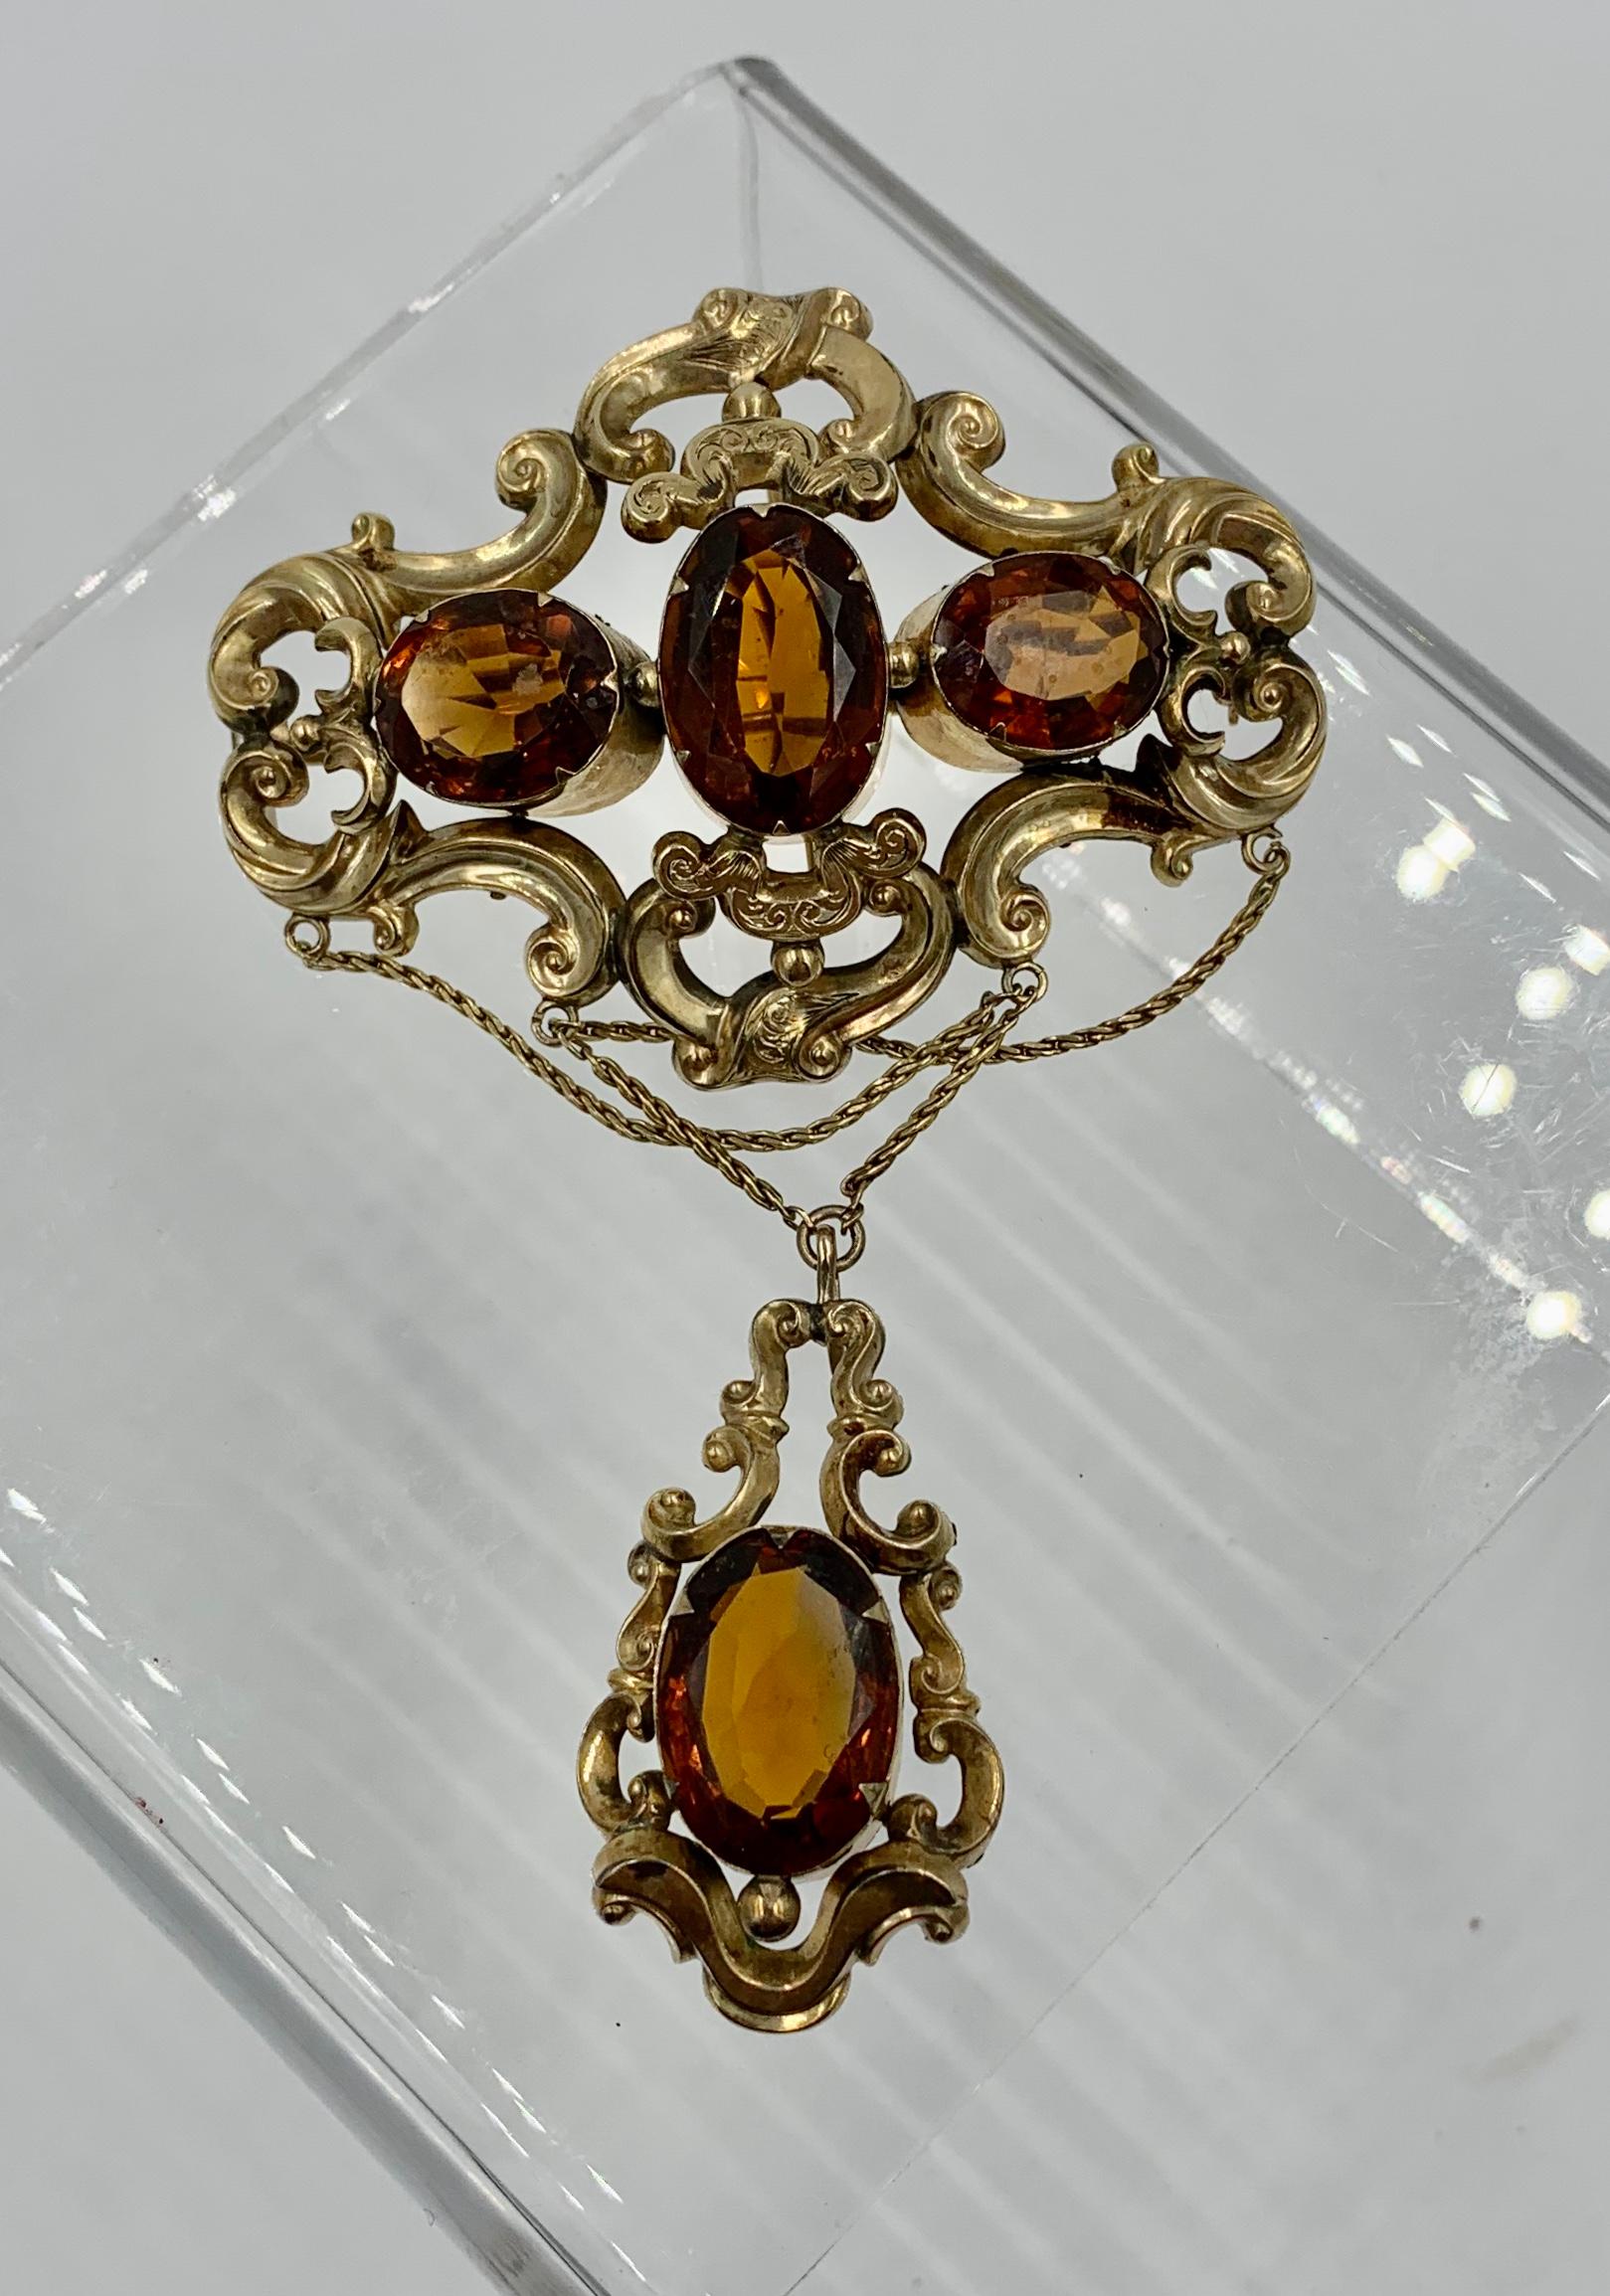 Victorian 30 Carat Citrine Swag Pendant Brooch Gold Monumental For Sale 1